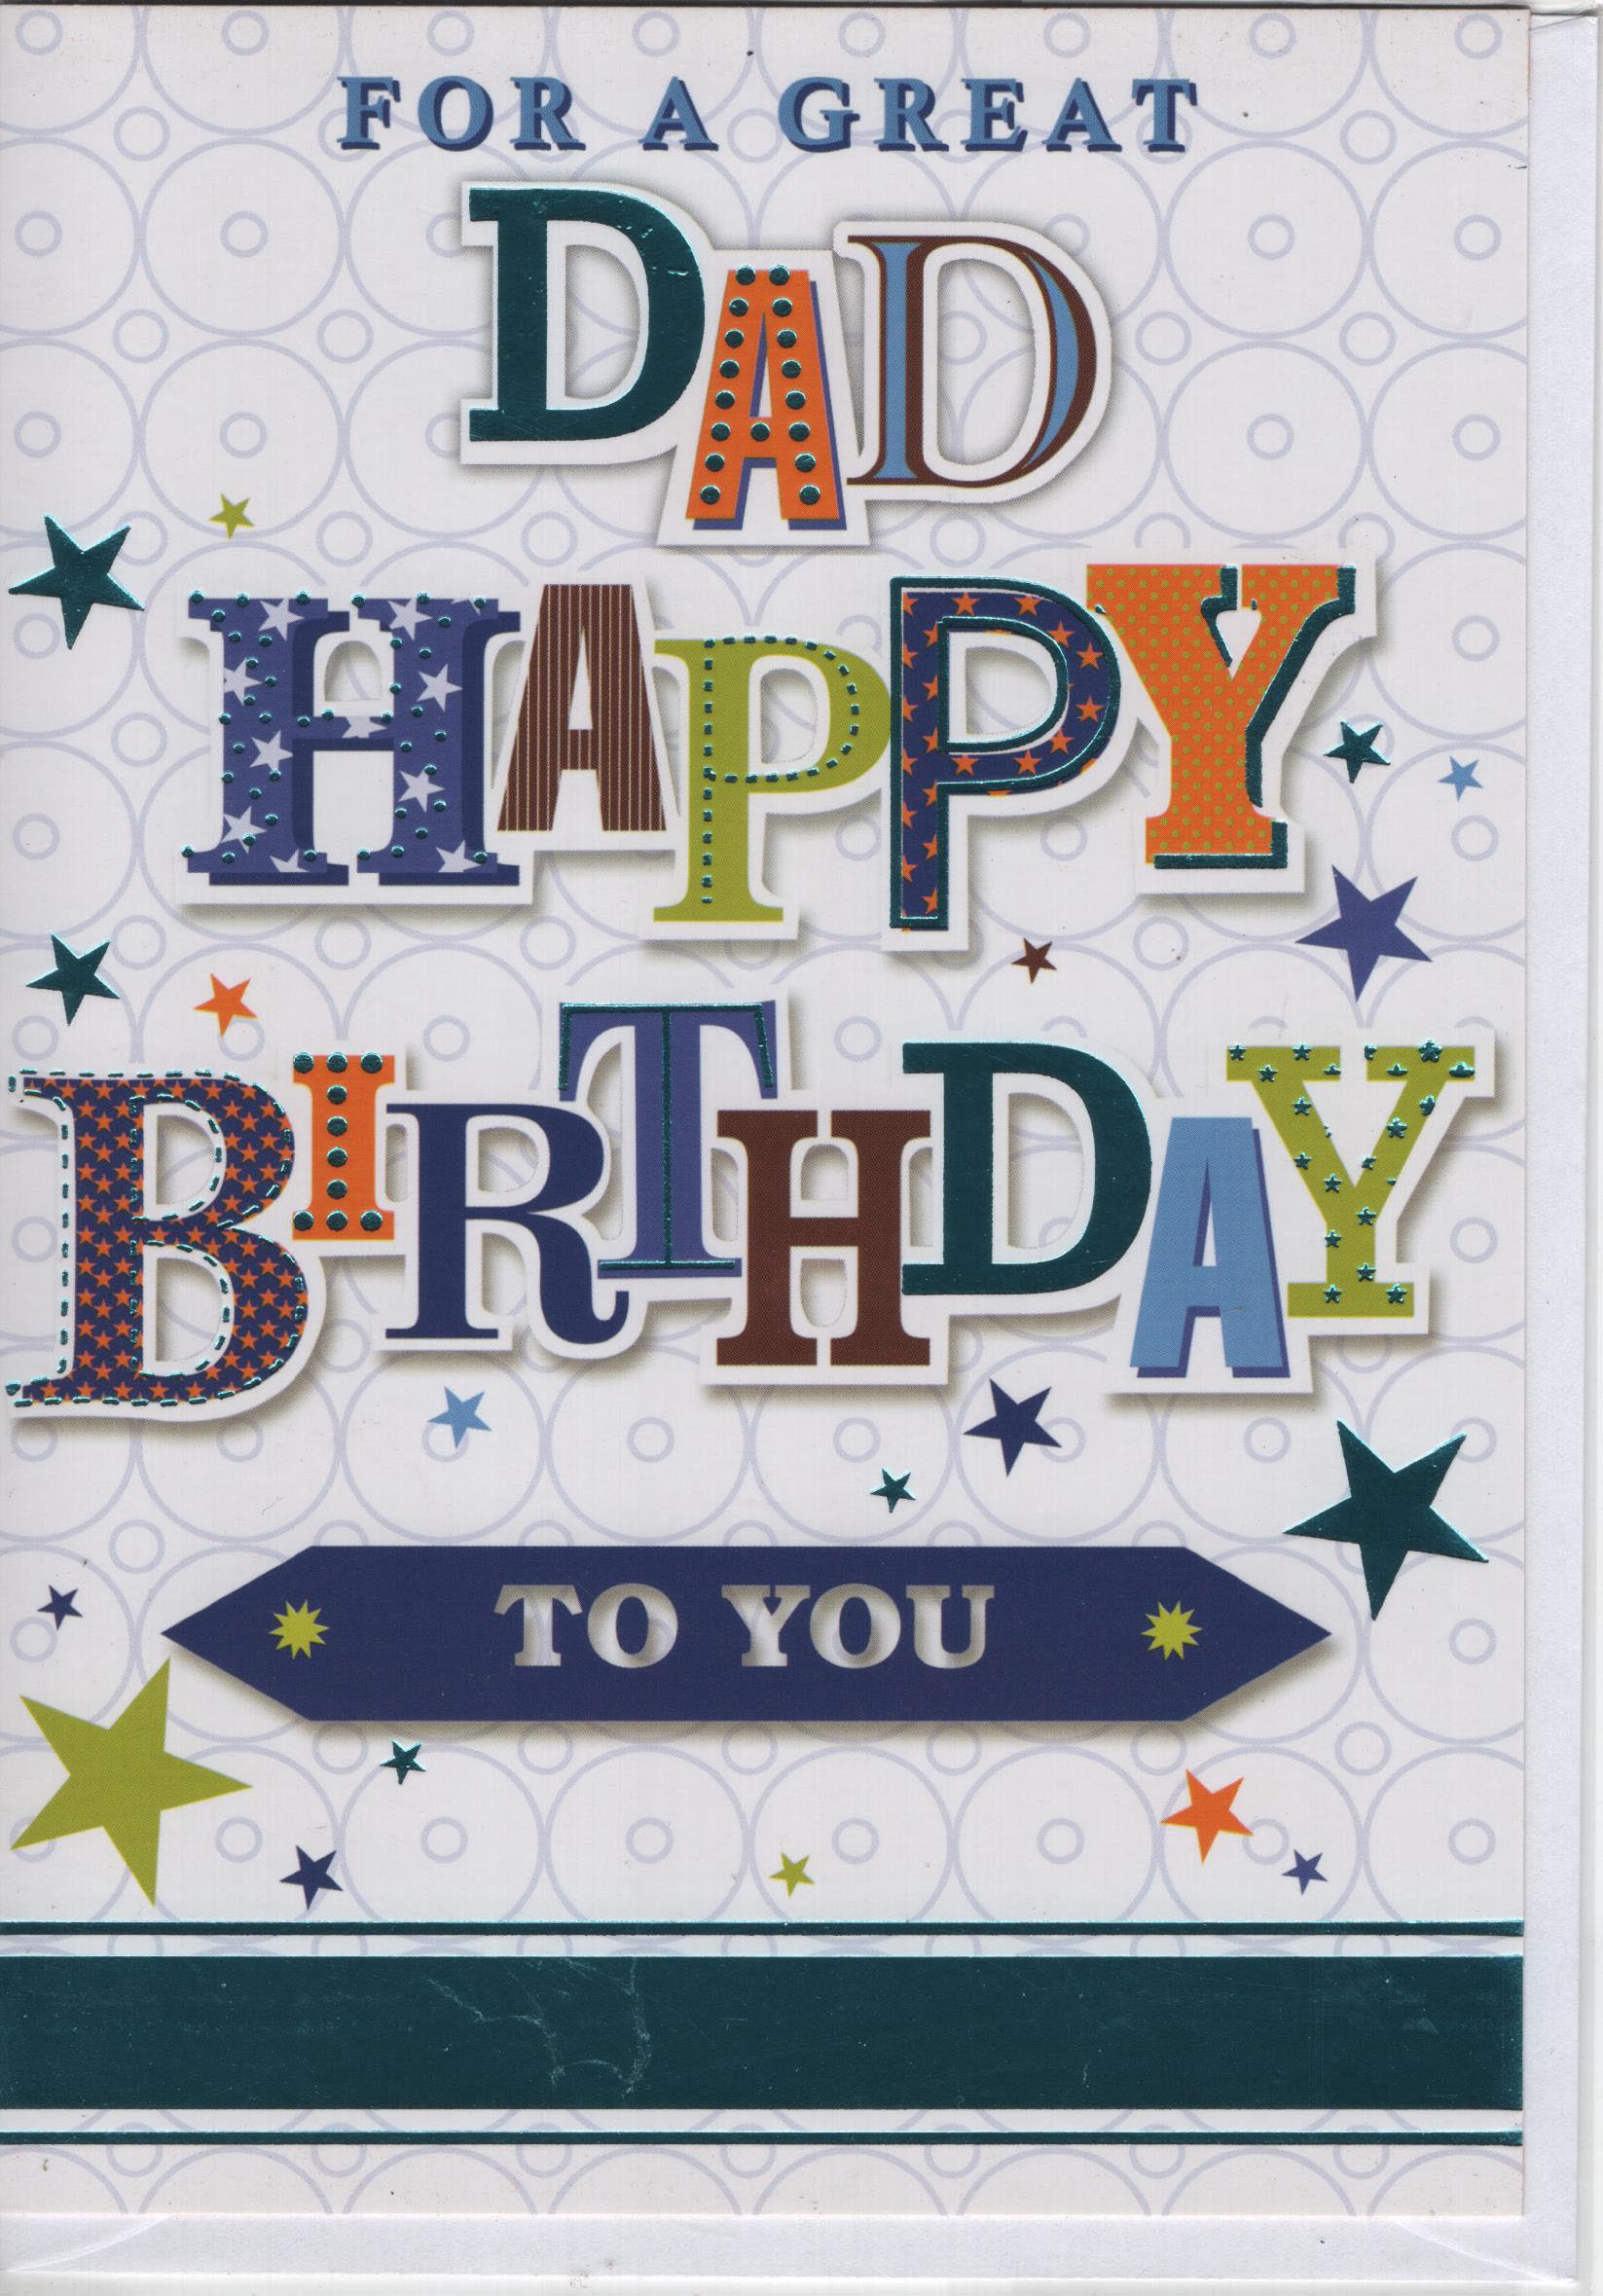 For a Great Dad Happy Birthday To You